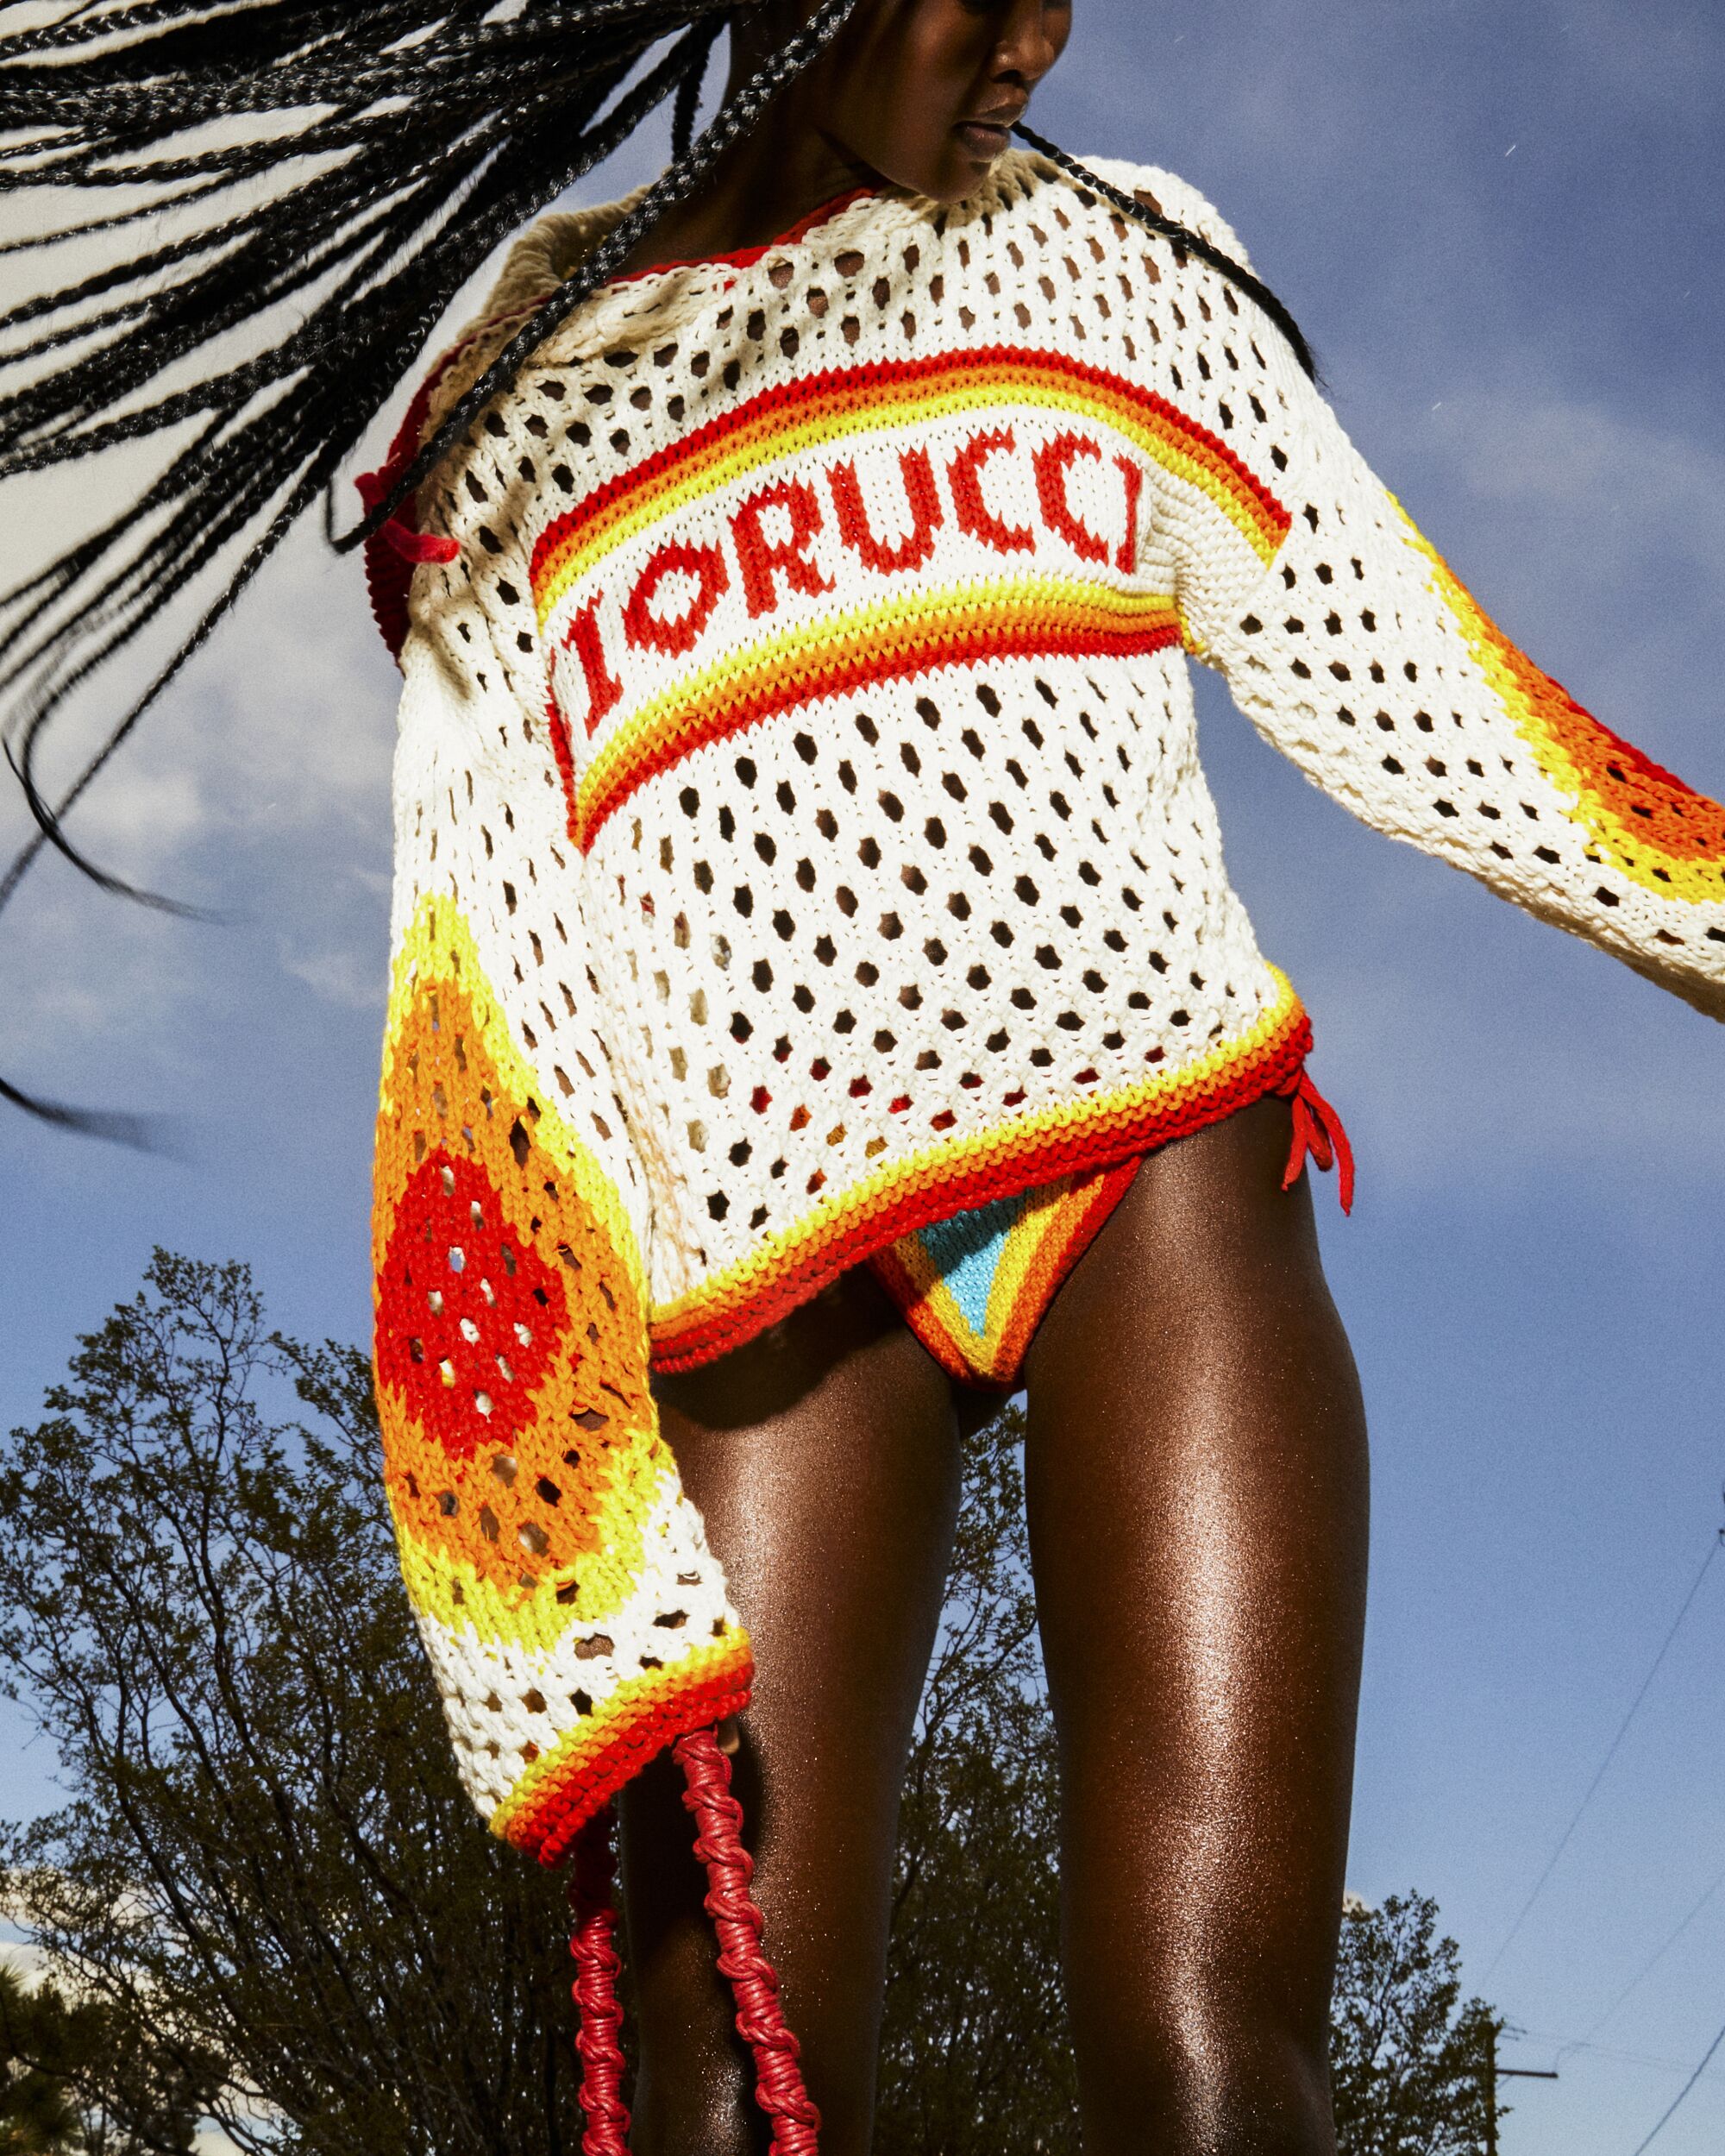 Italian brand Fiorucci is bringing its SS22 Desert Oasis collection to Fred Segal just in time for Coachella.